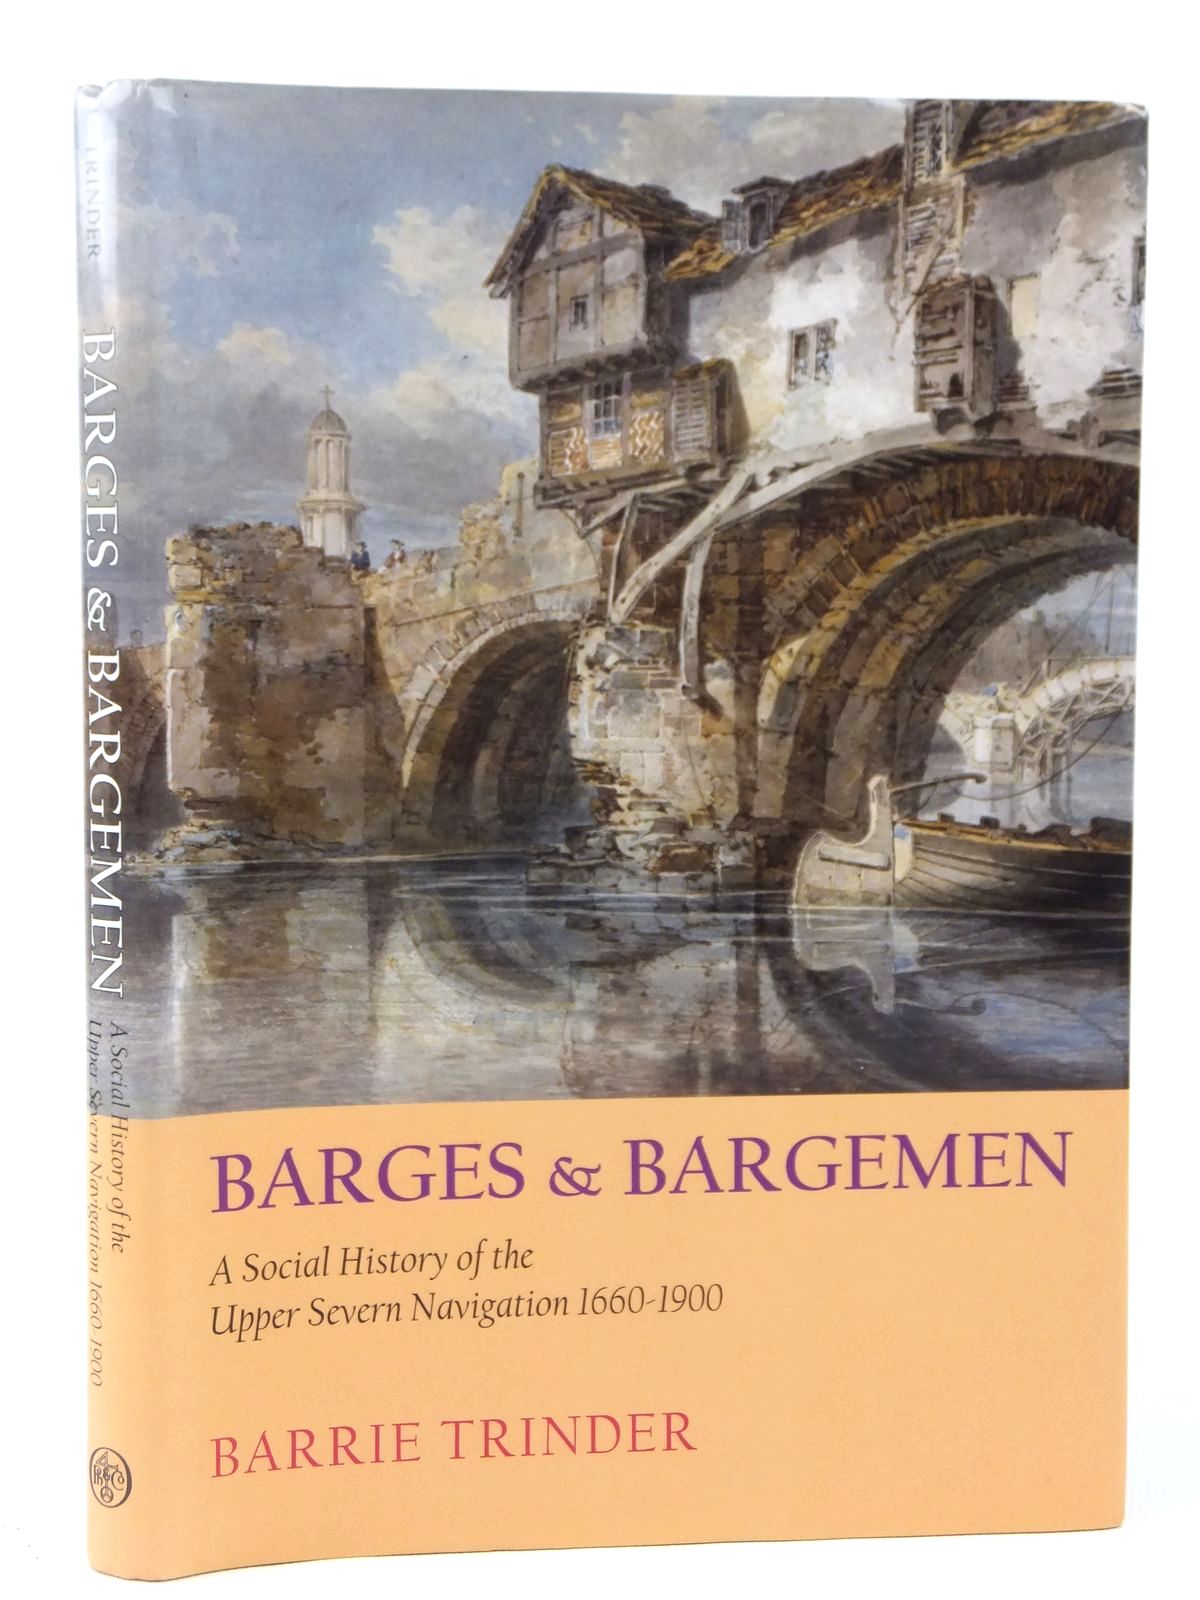 Photo of BARGES AND BARGEMEN A SOCIAL HISTORY OF THE UPPER SEVERN NAVIGATION 1660-1900 written by Trinder, Barrie published by Phillimore (STOCK CODE: 1608663)  for sale by Stella & Rose's Books